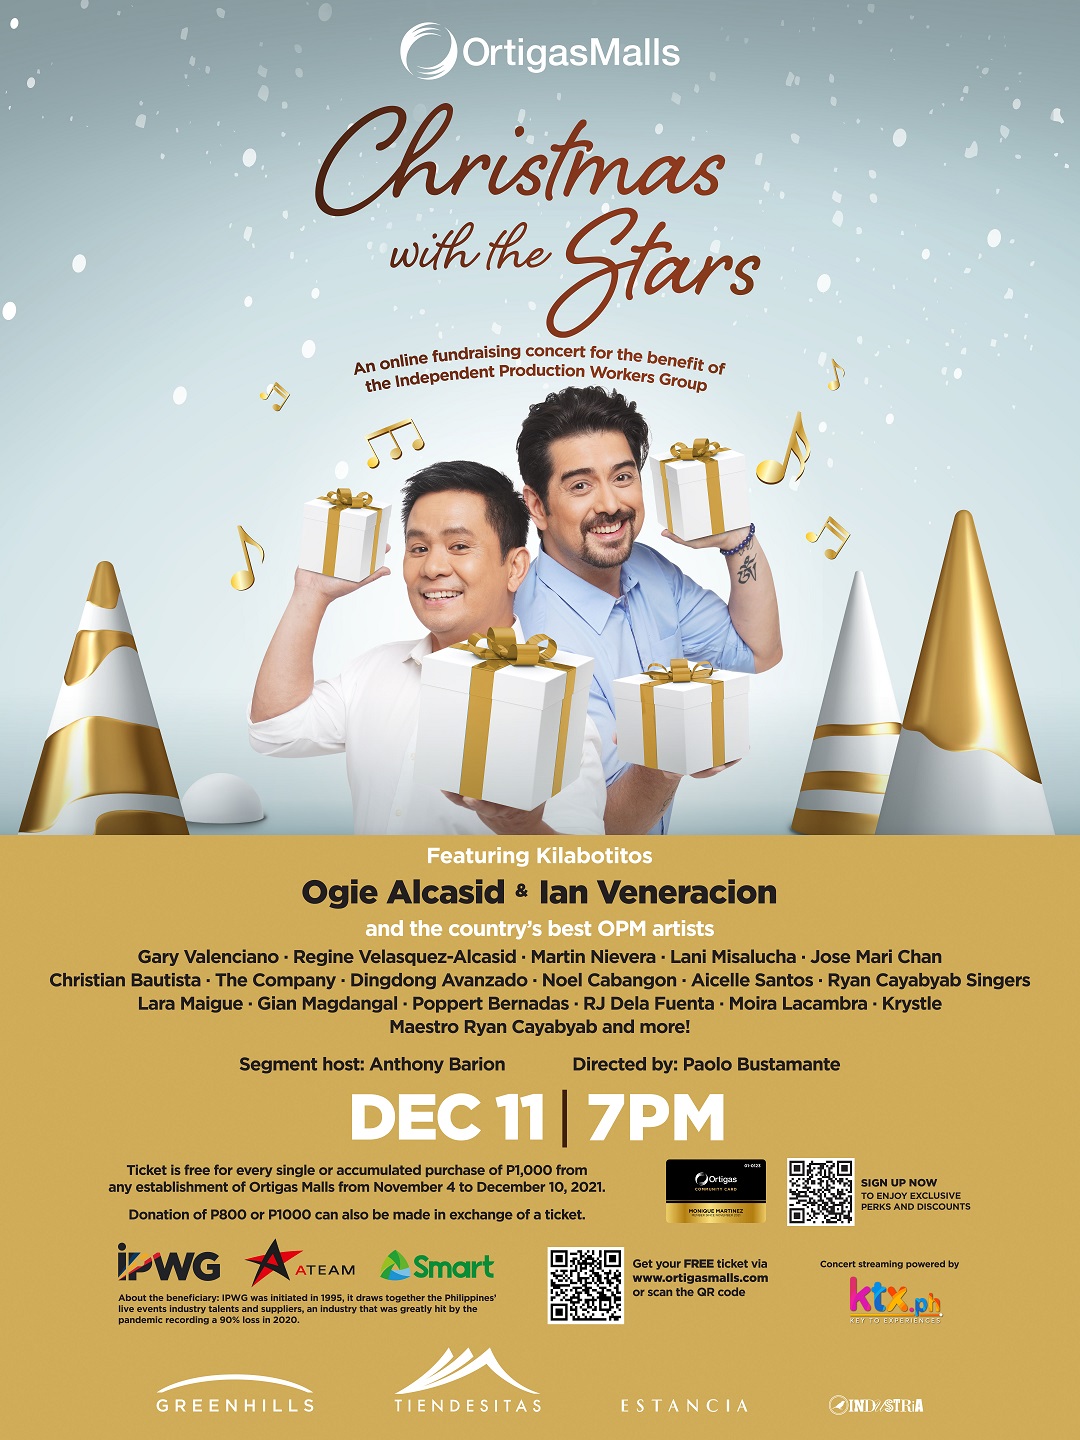 Ortigas Malls Christmas with the Stars